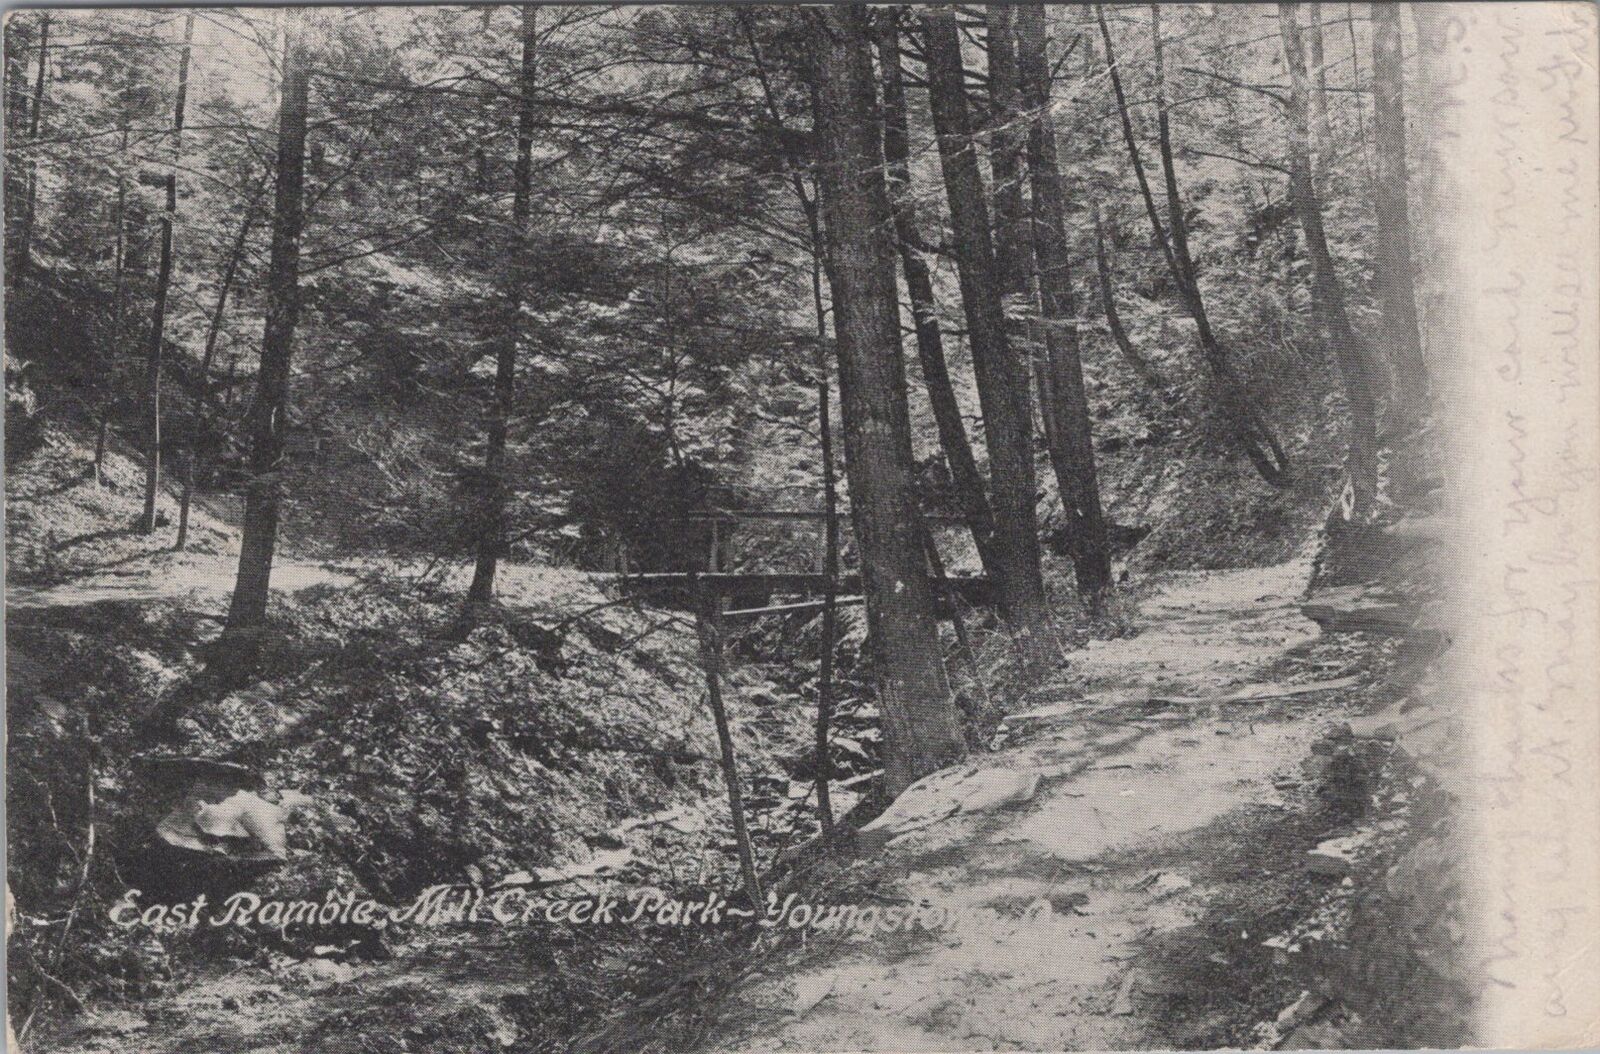 East Ramble, Mill Creek Park Youngstown Ohio 1907 Postcard